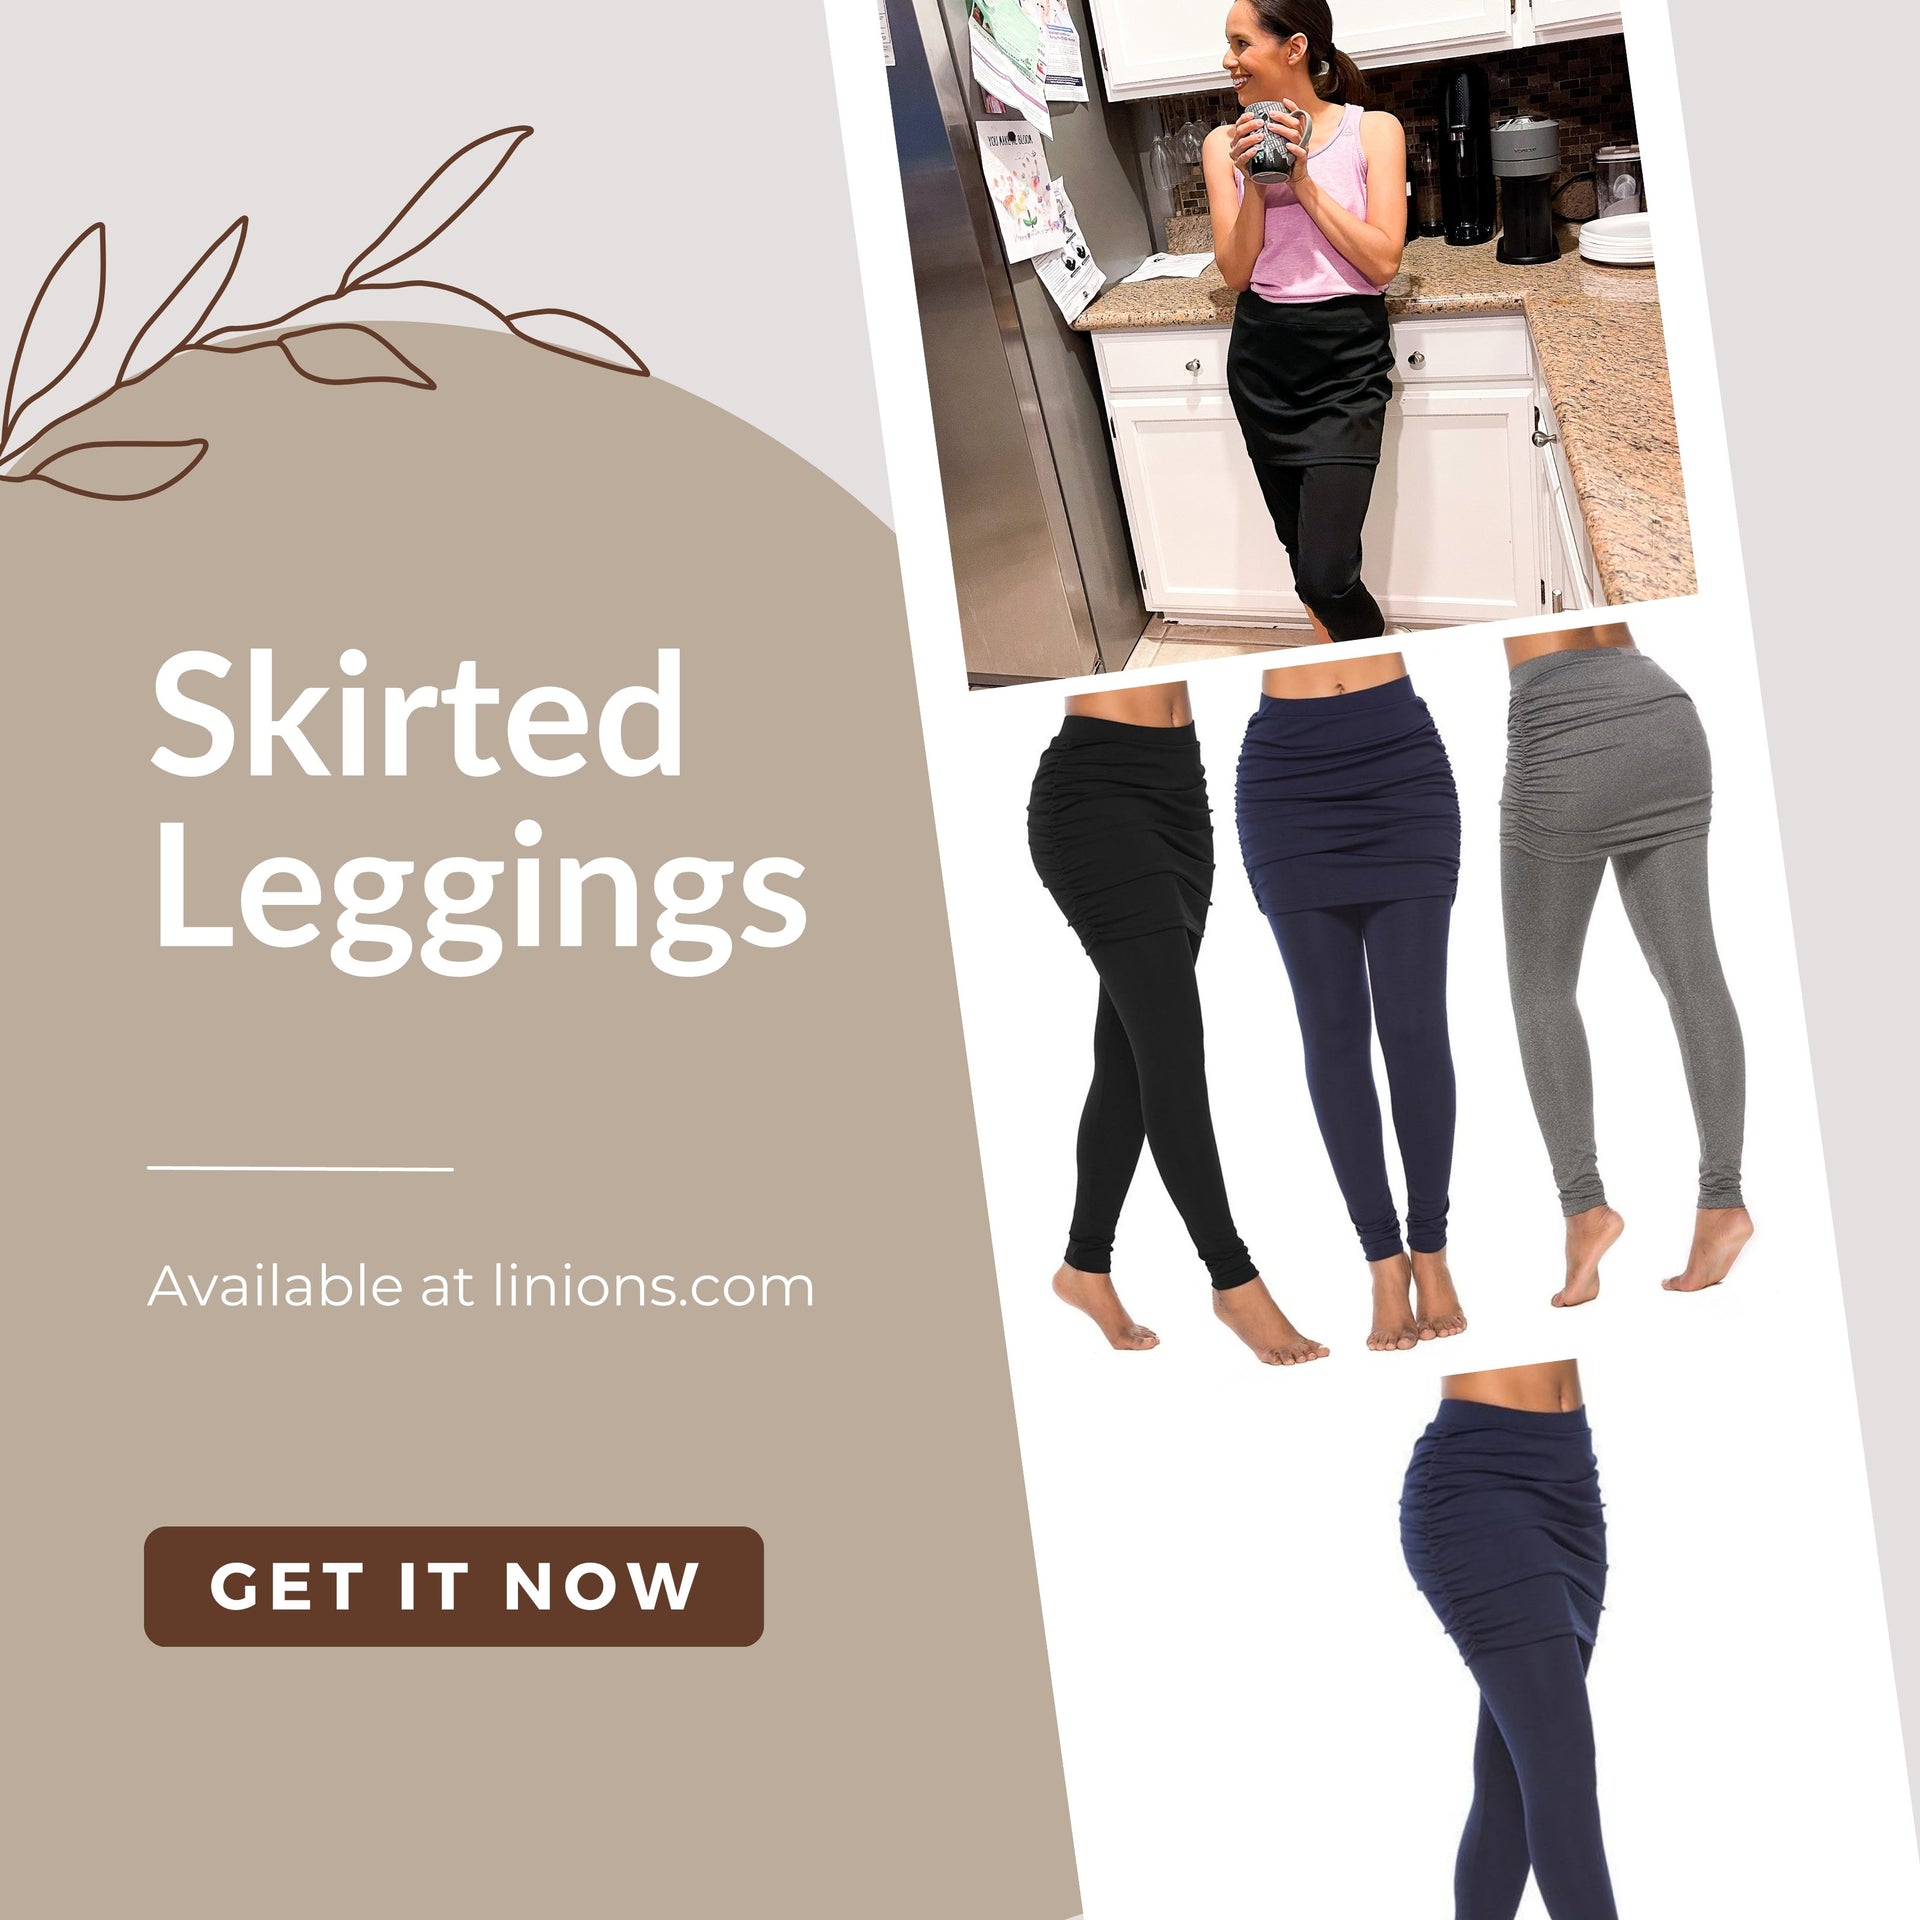 Guide to Skirt Leggings: The 2-in-1 Fashion Item You'll Love